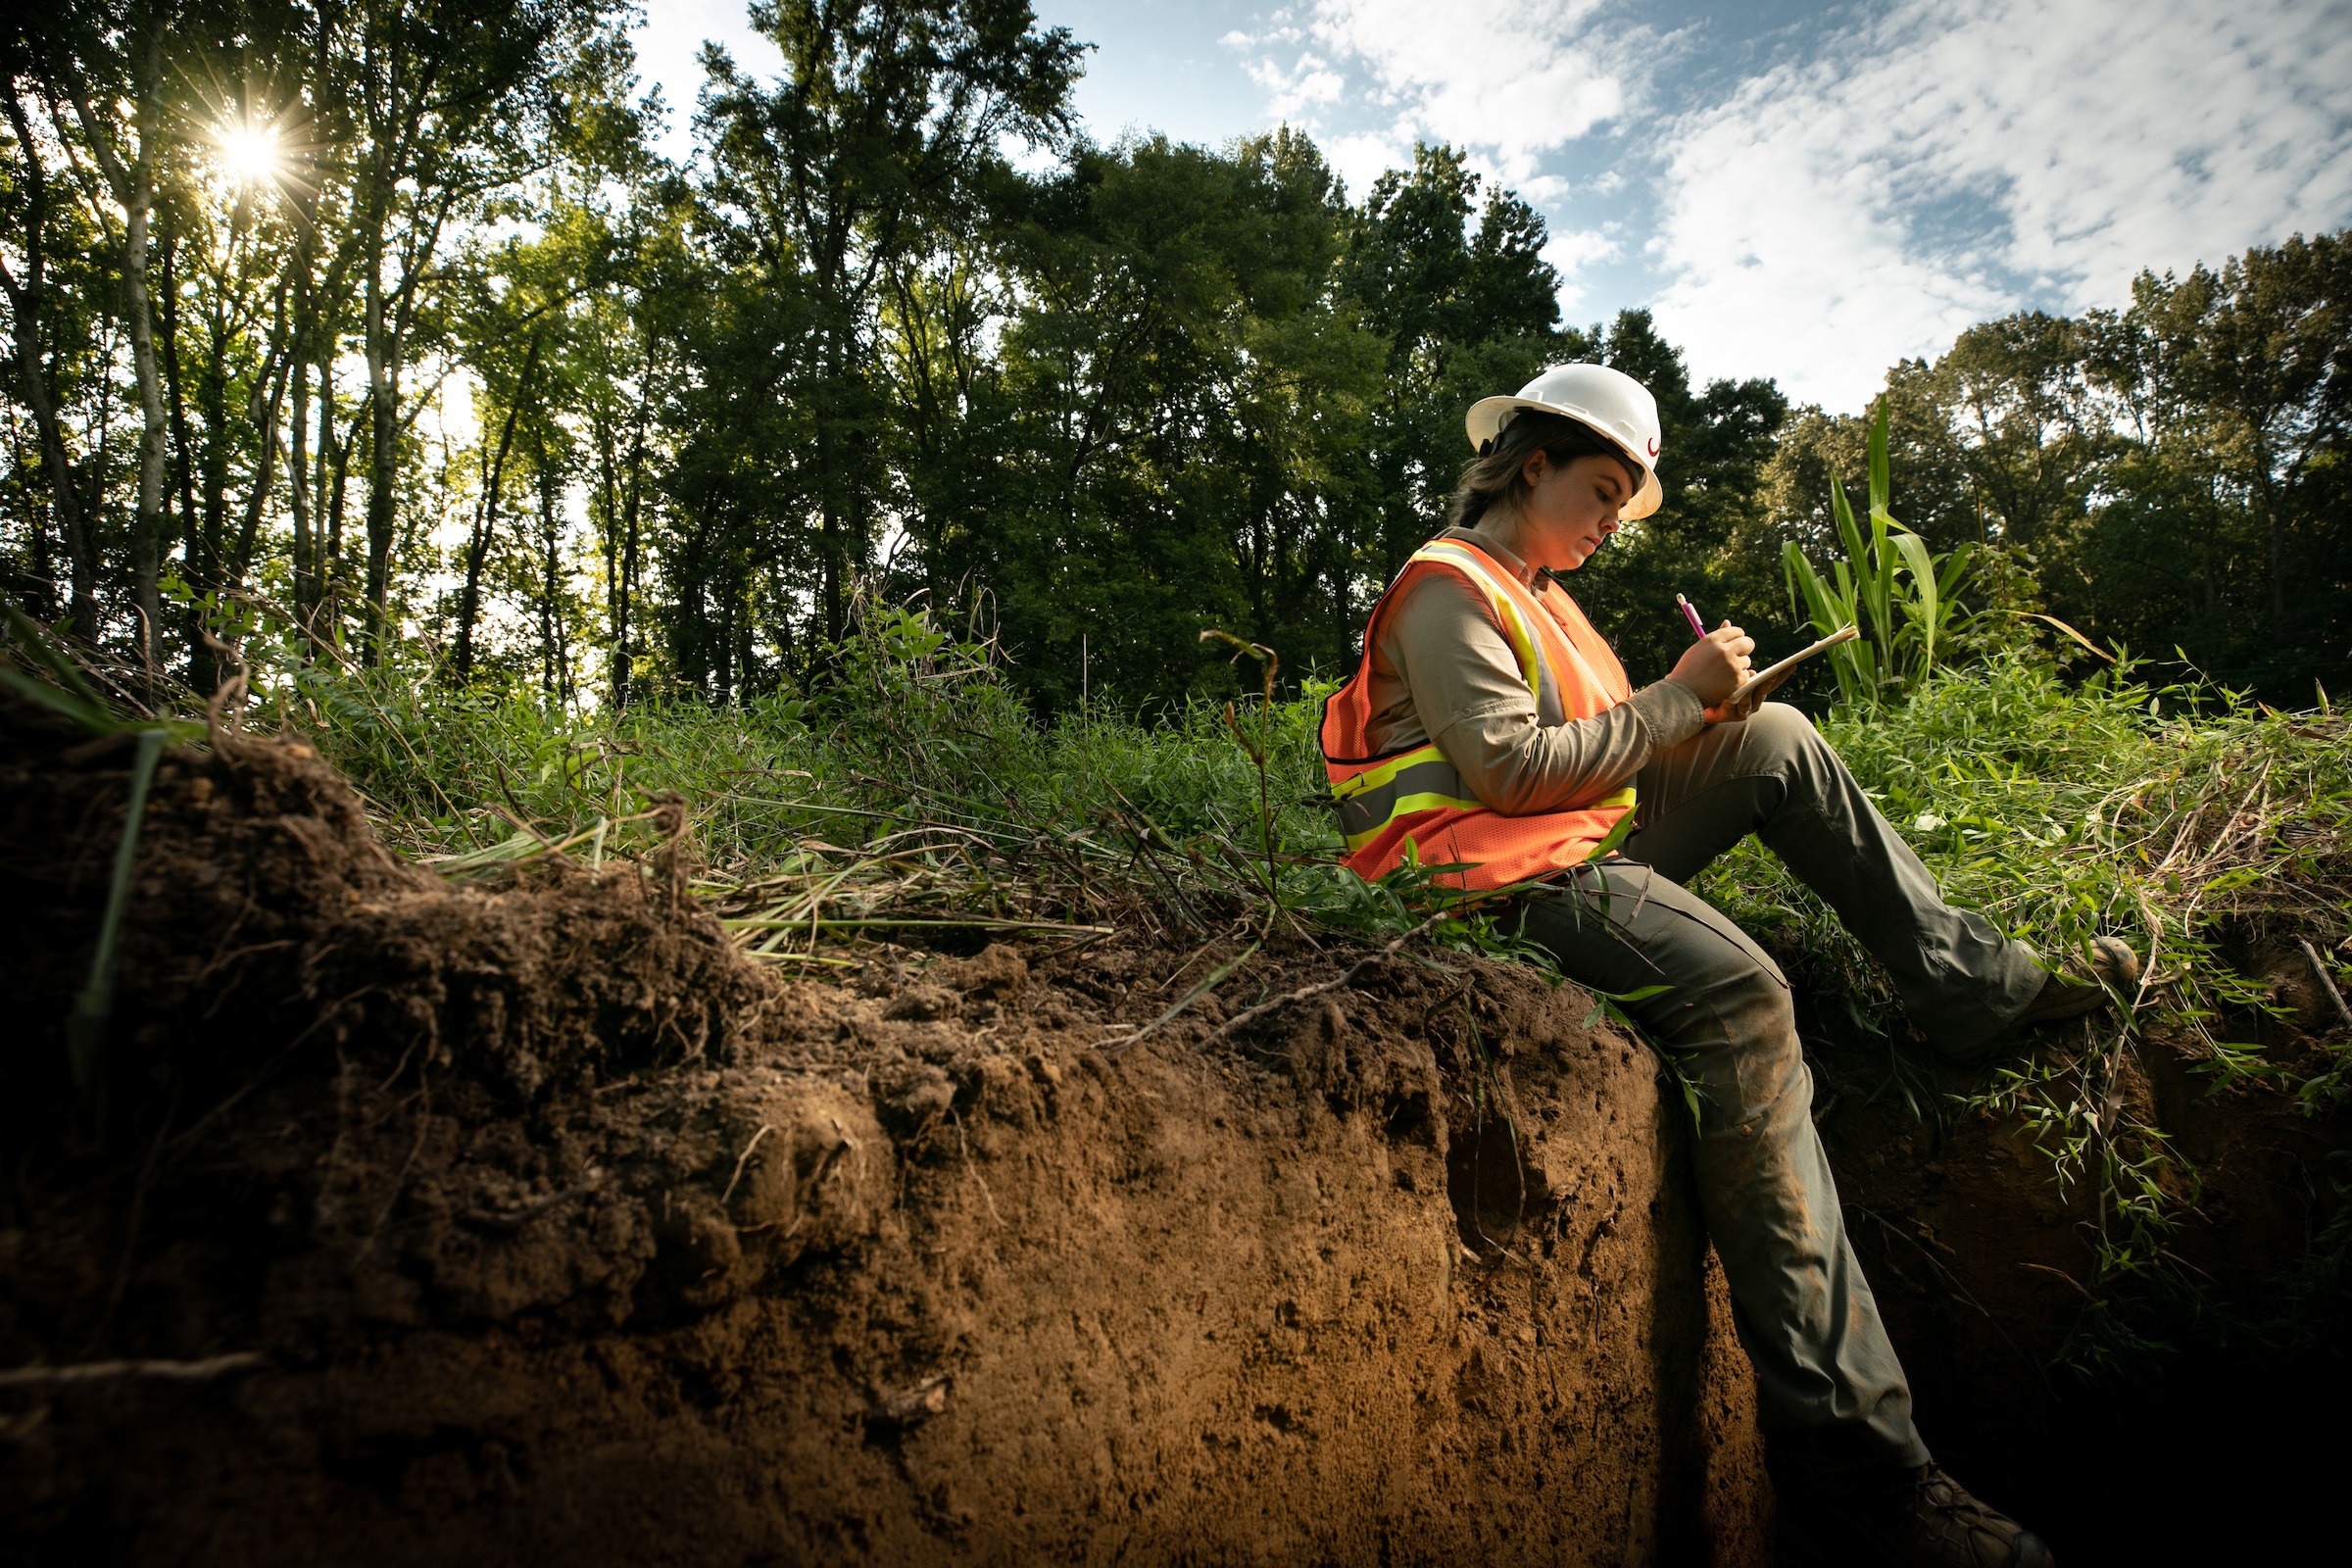 A researcher in safety gear sits on the edge of a hole in the forest taking notes.